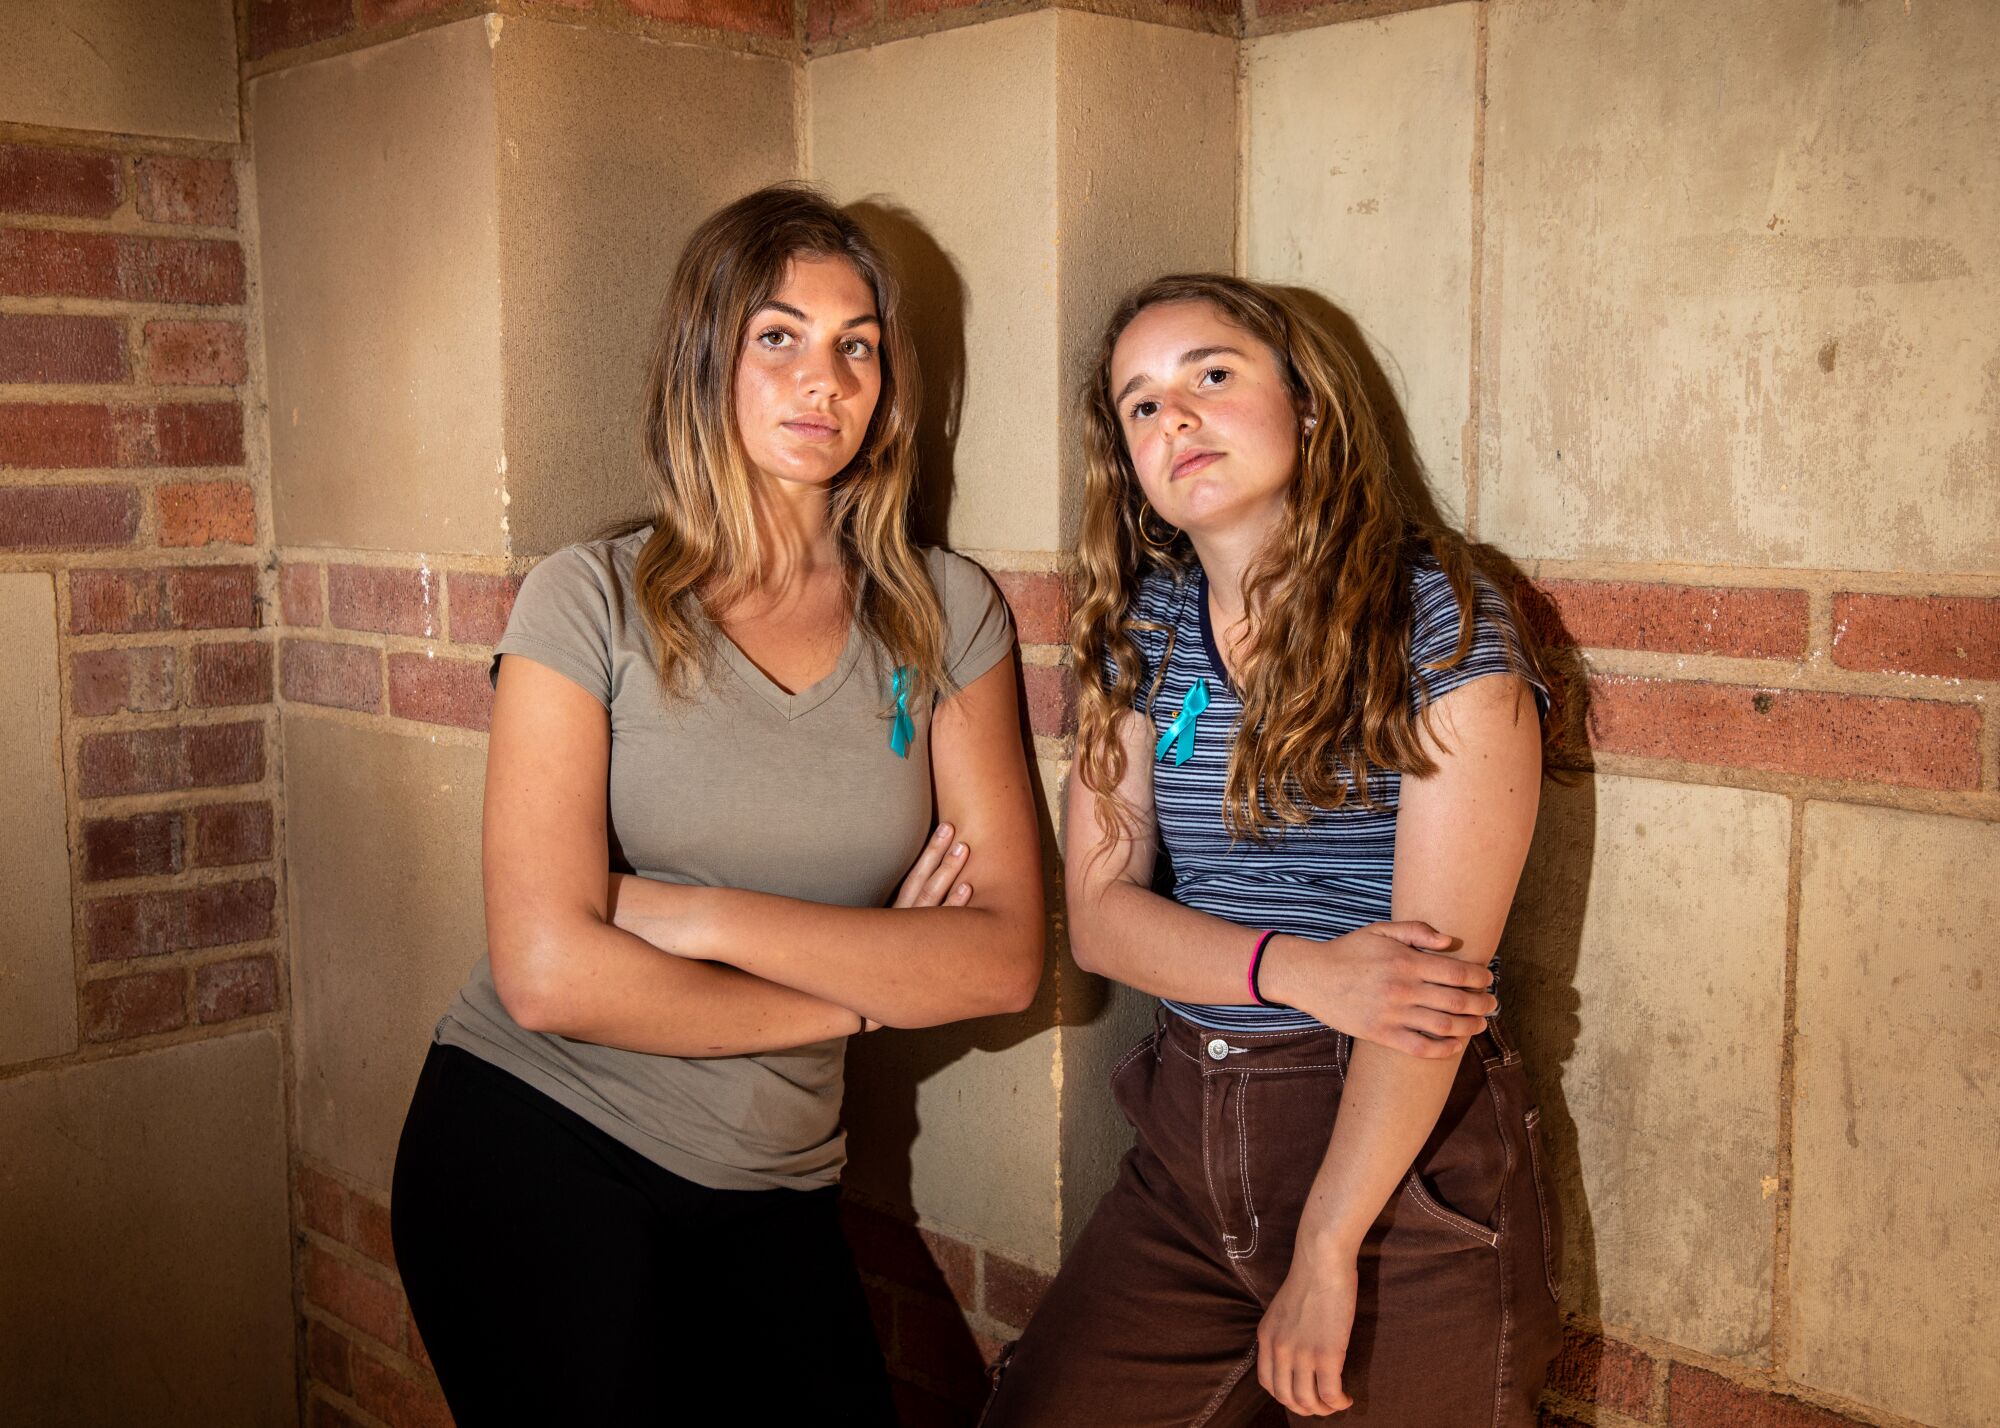 Two students stand side by side, leaning against the stone wall behind them, looking into the camera.